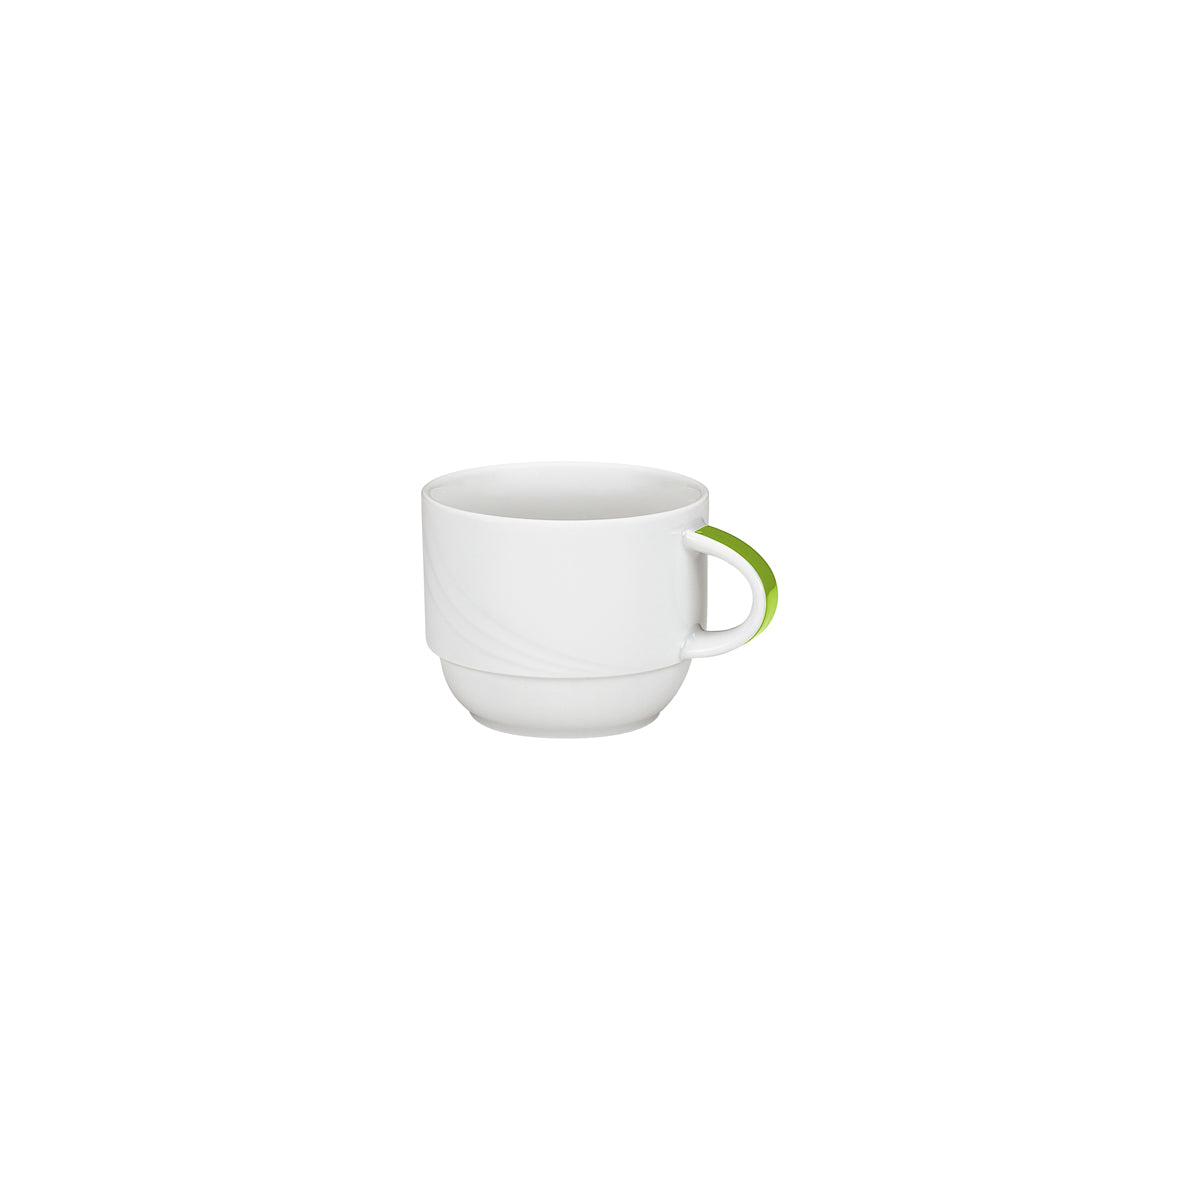 SH9185119/62941 Donna Senior Decor Stackable Cup with Light Green Band 180ml Tomkin Australia Hospitality Supplies